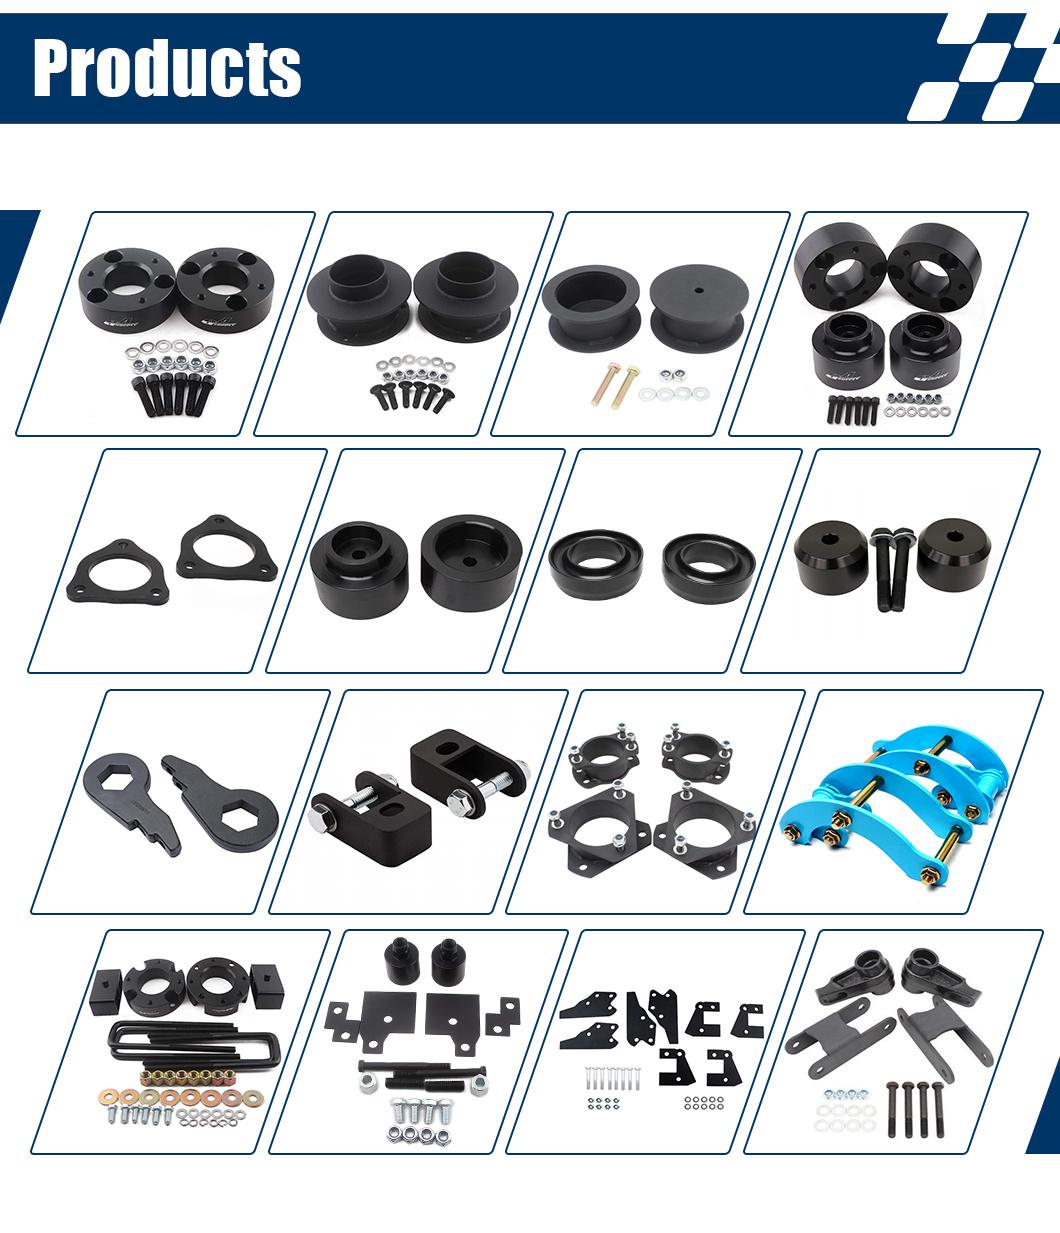 1-3" Front and 2-4" Rear Leveling Lift Kit for 4X4